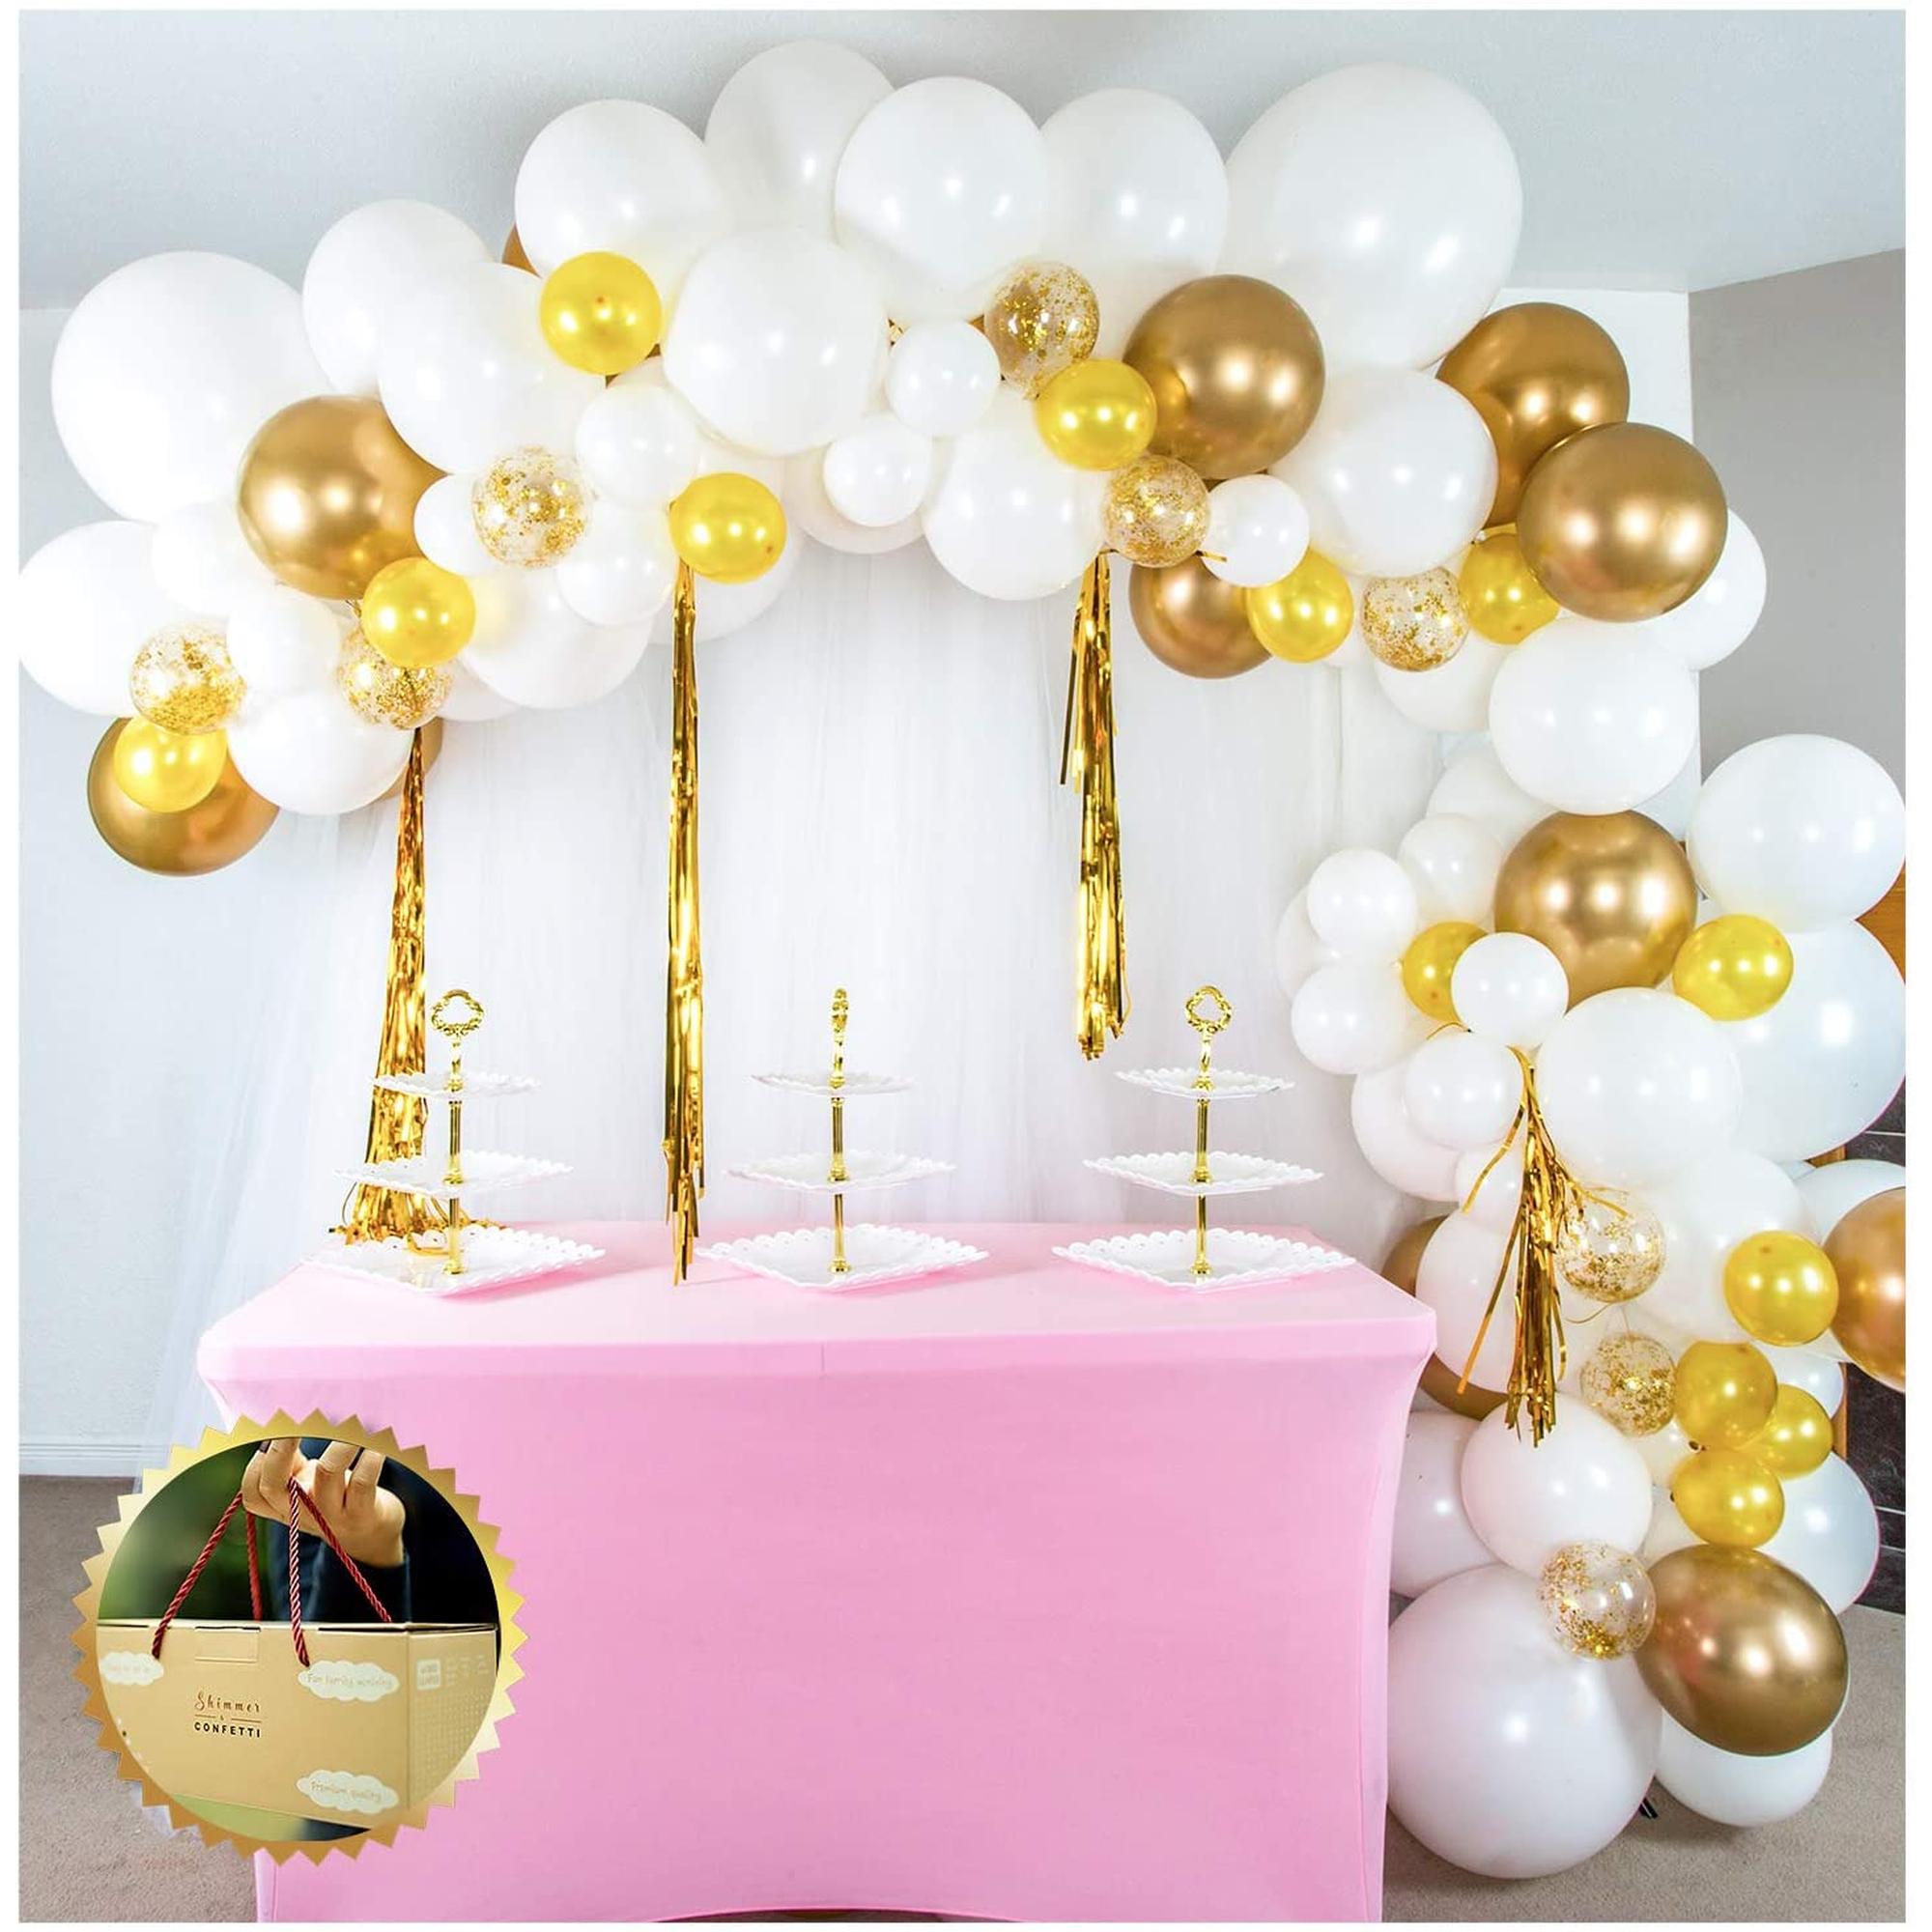 16-Foot DIY White and Gold Balloon Arch and Garland Kit with Gold Frin